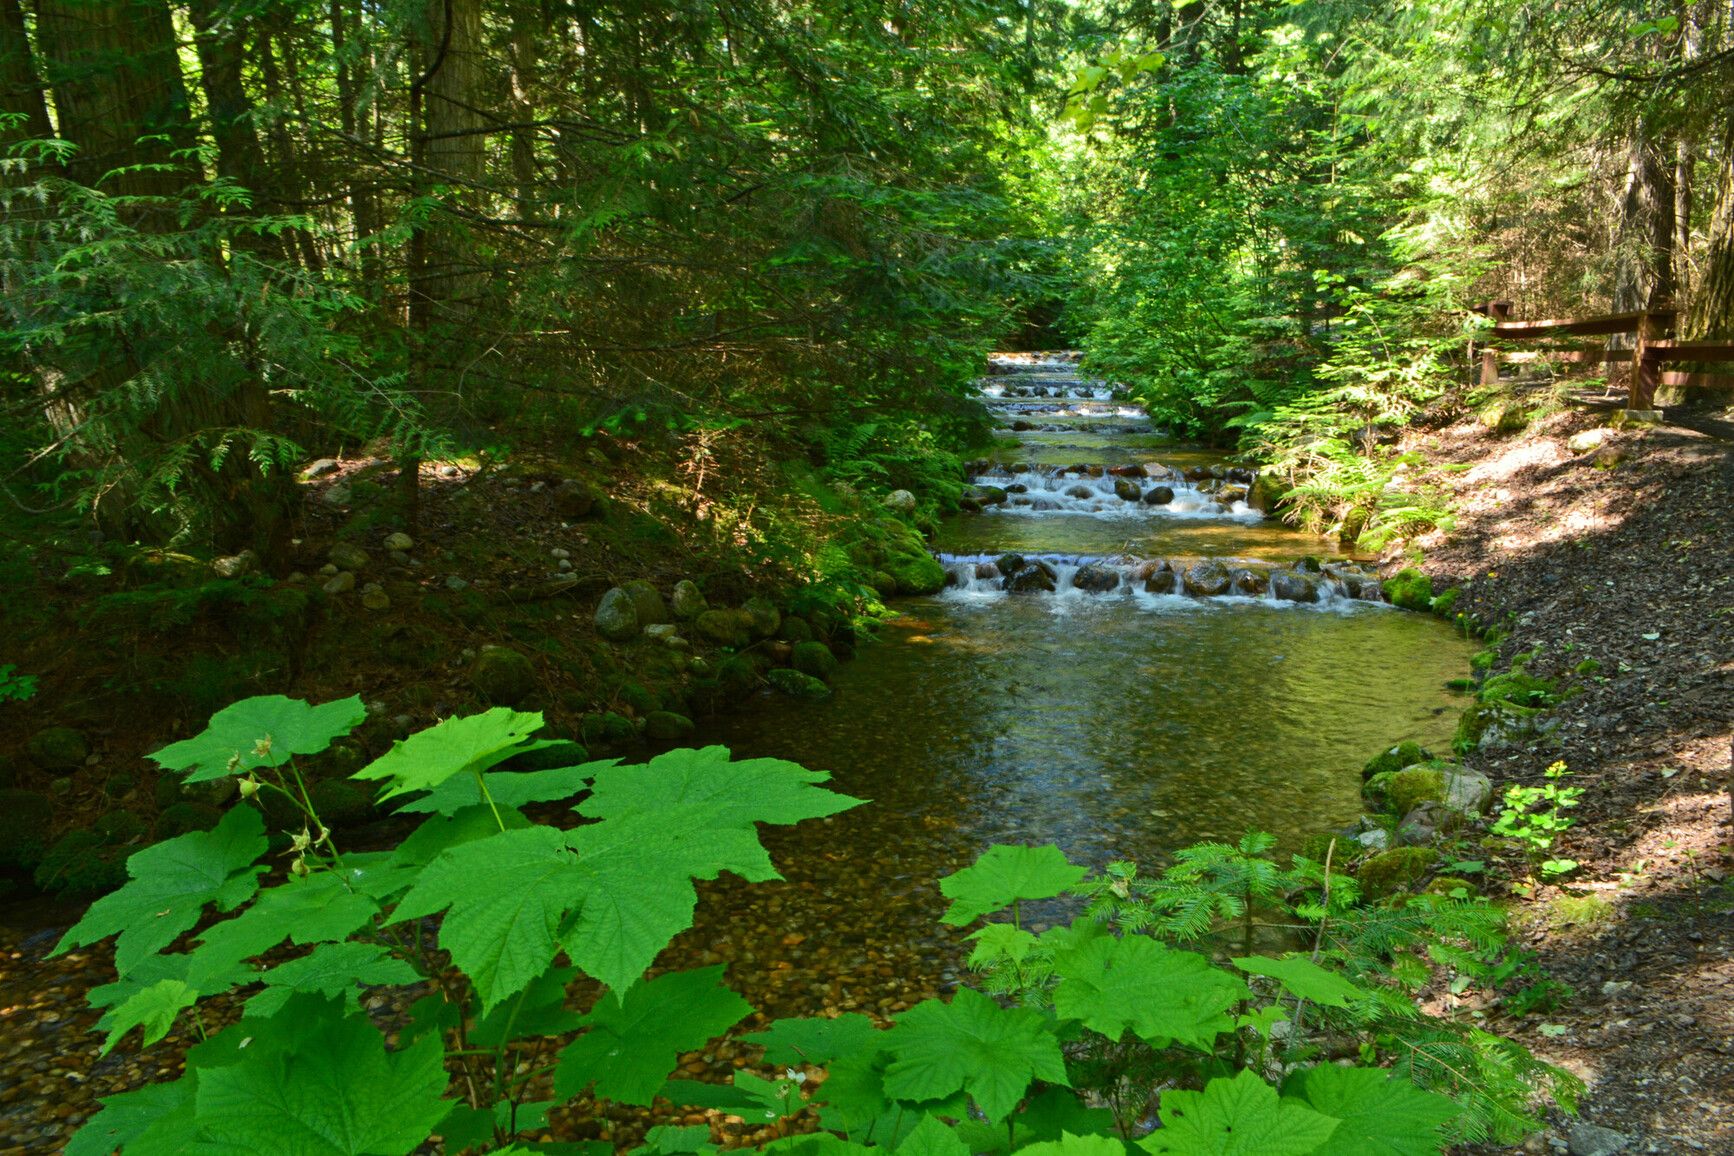 Serene Kokanee Creek cascades through a forested landscape, its gentle rocky falls adding to the peaceful ambiance.